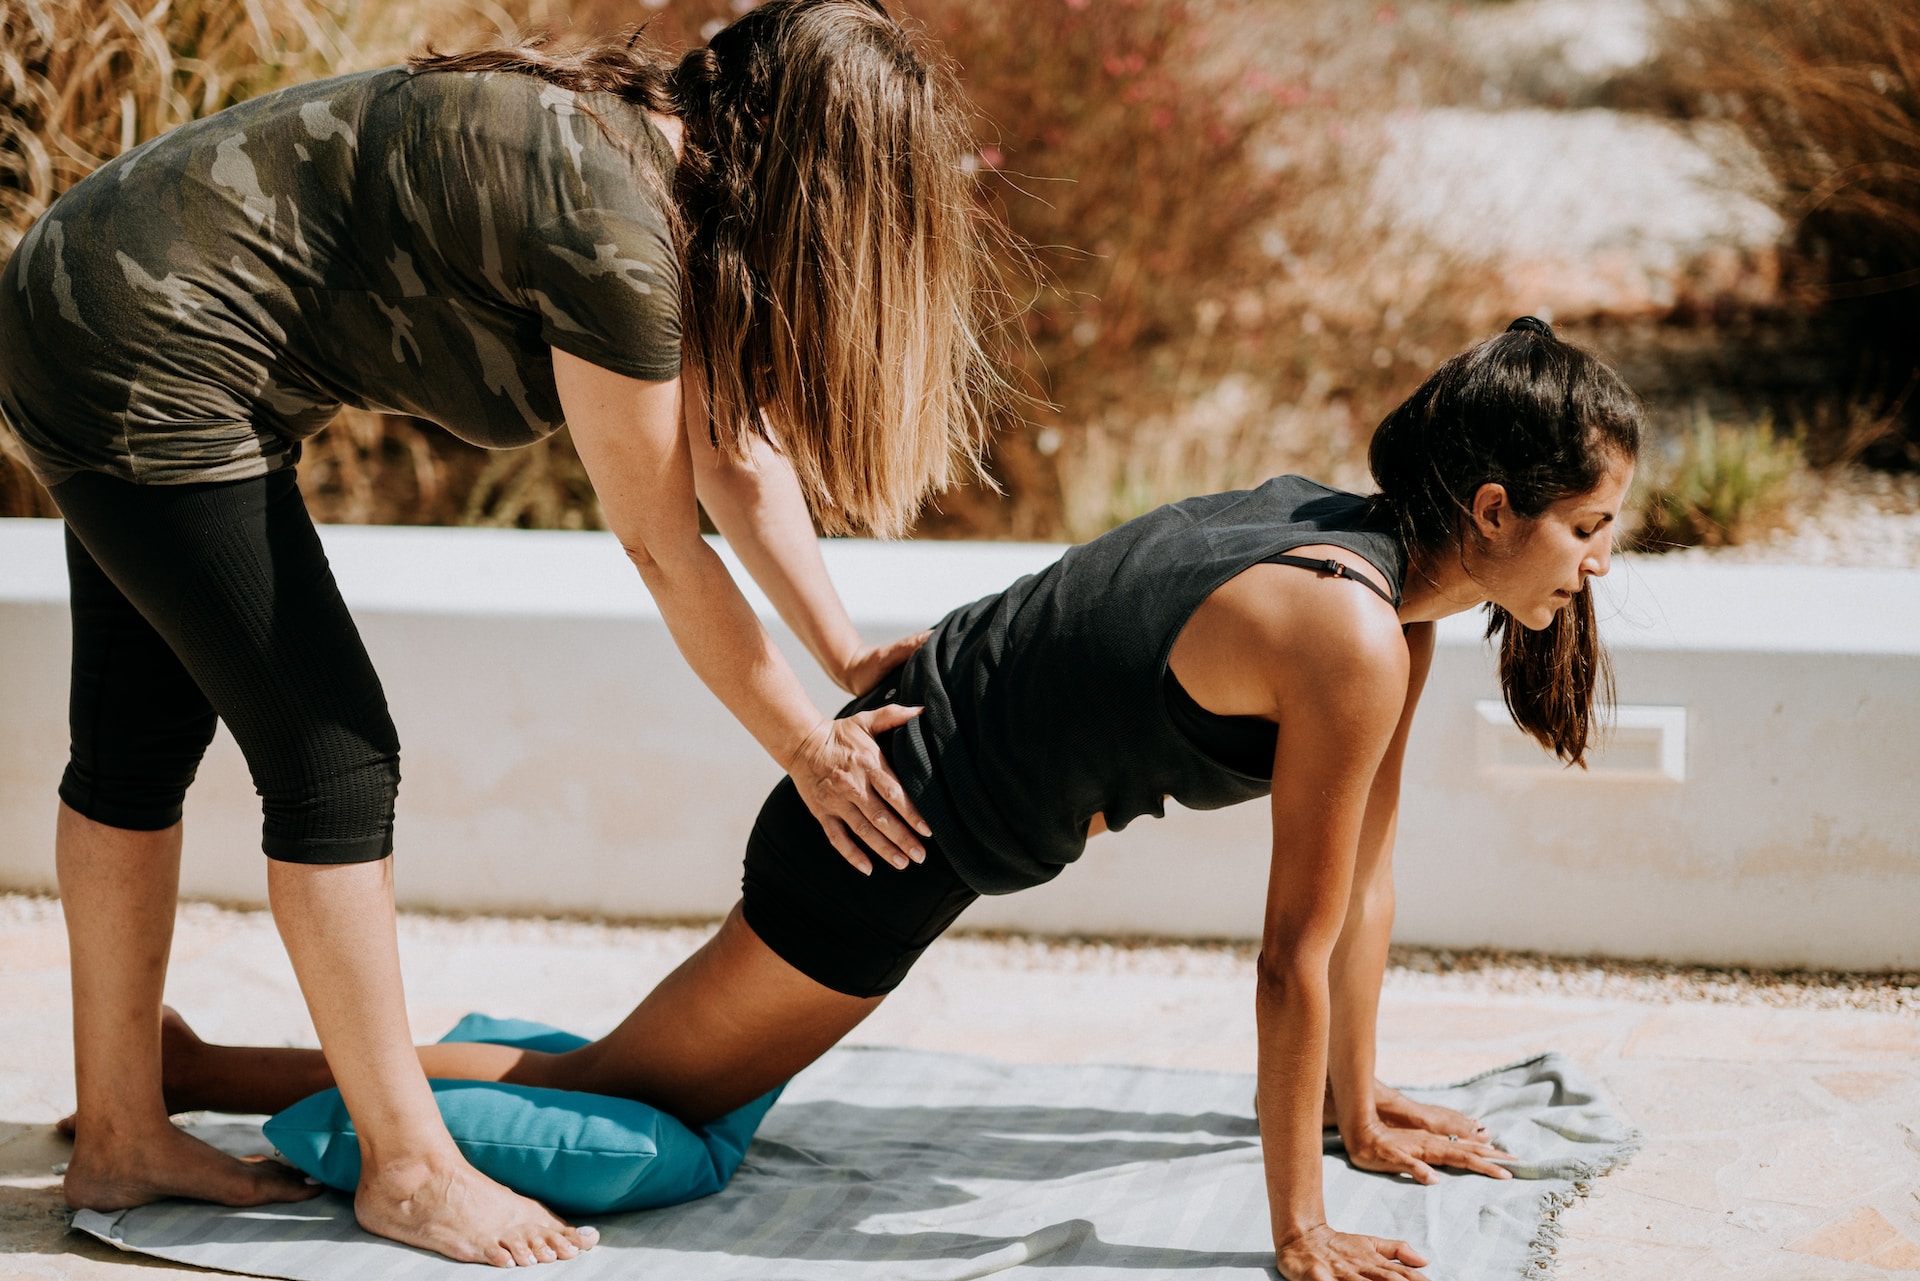 the image shows two women on a stretching class